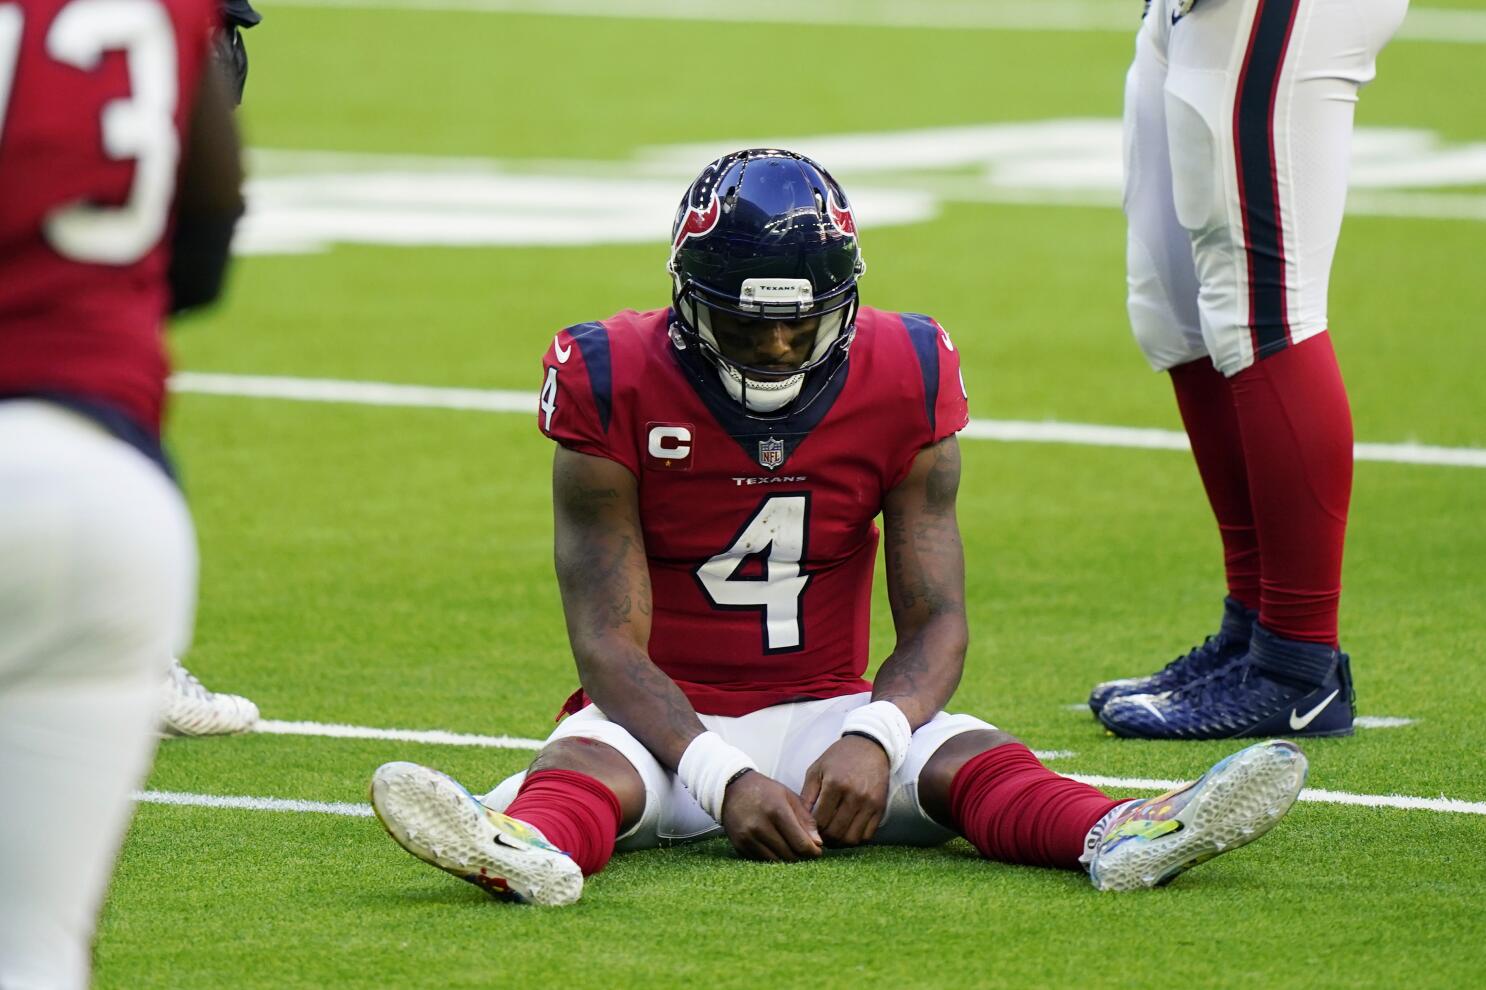 Houston Texans: Another close game and another loss